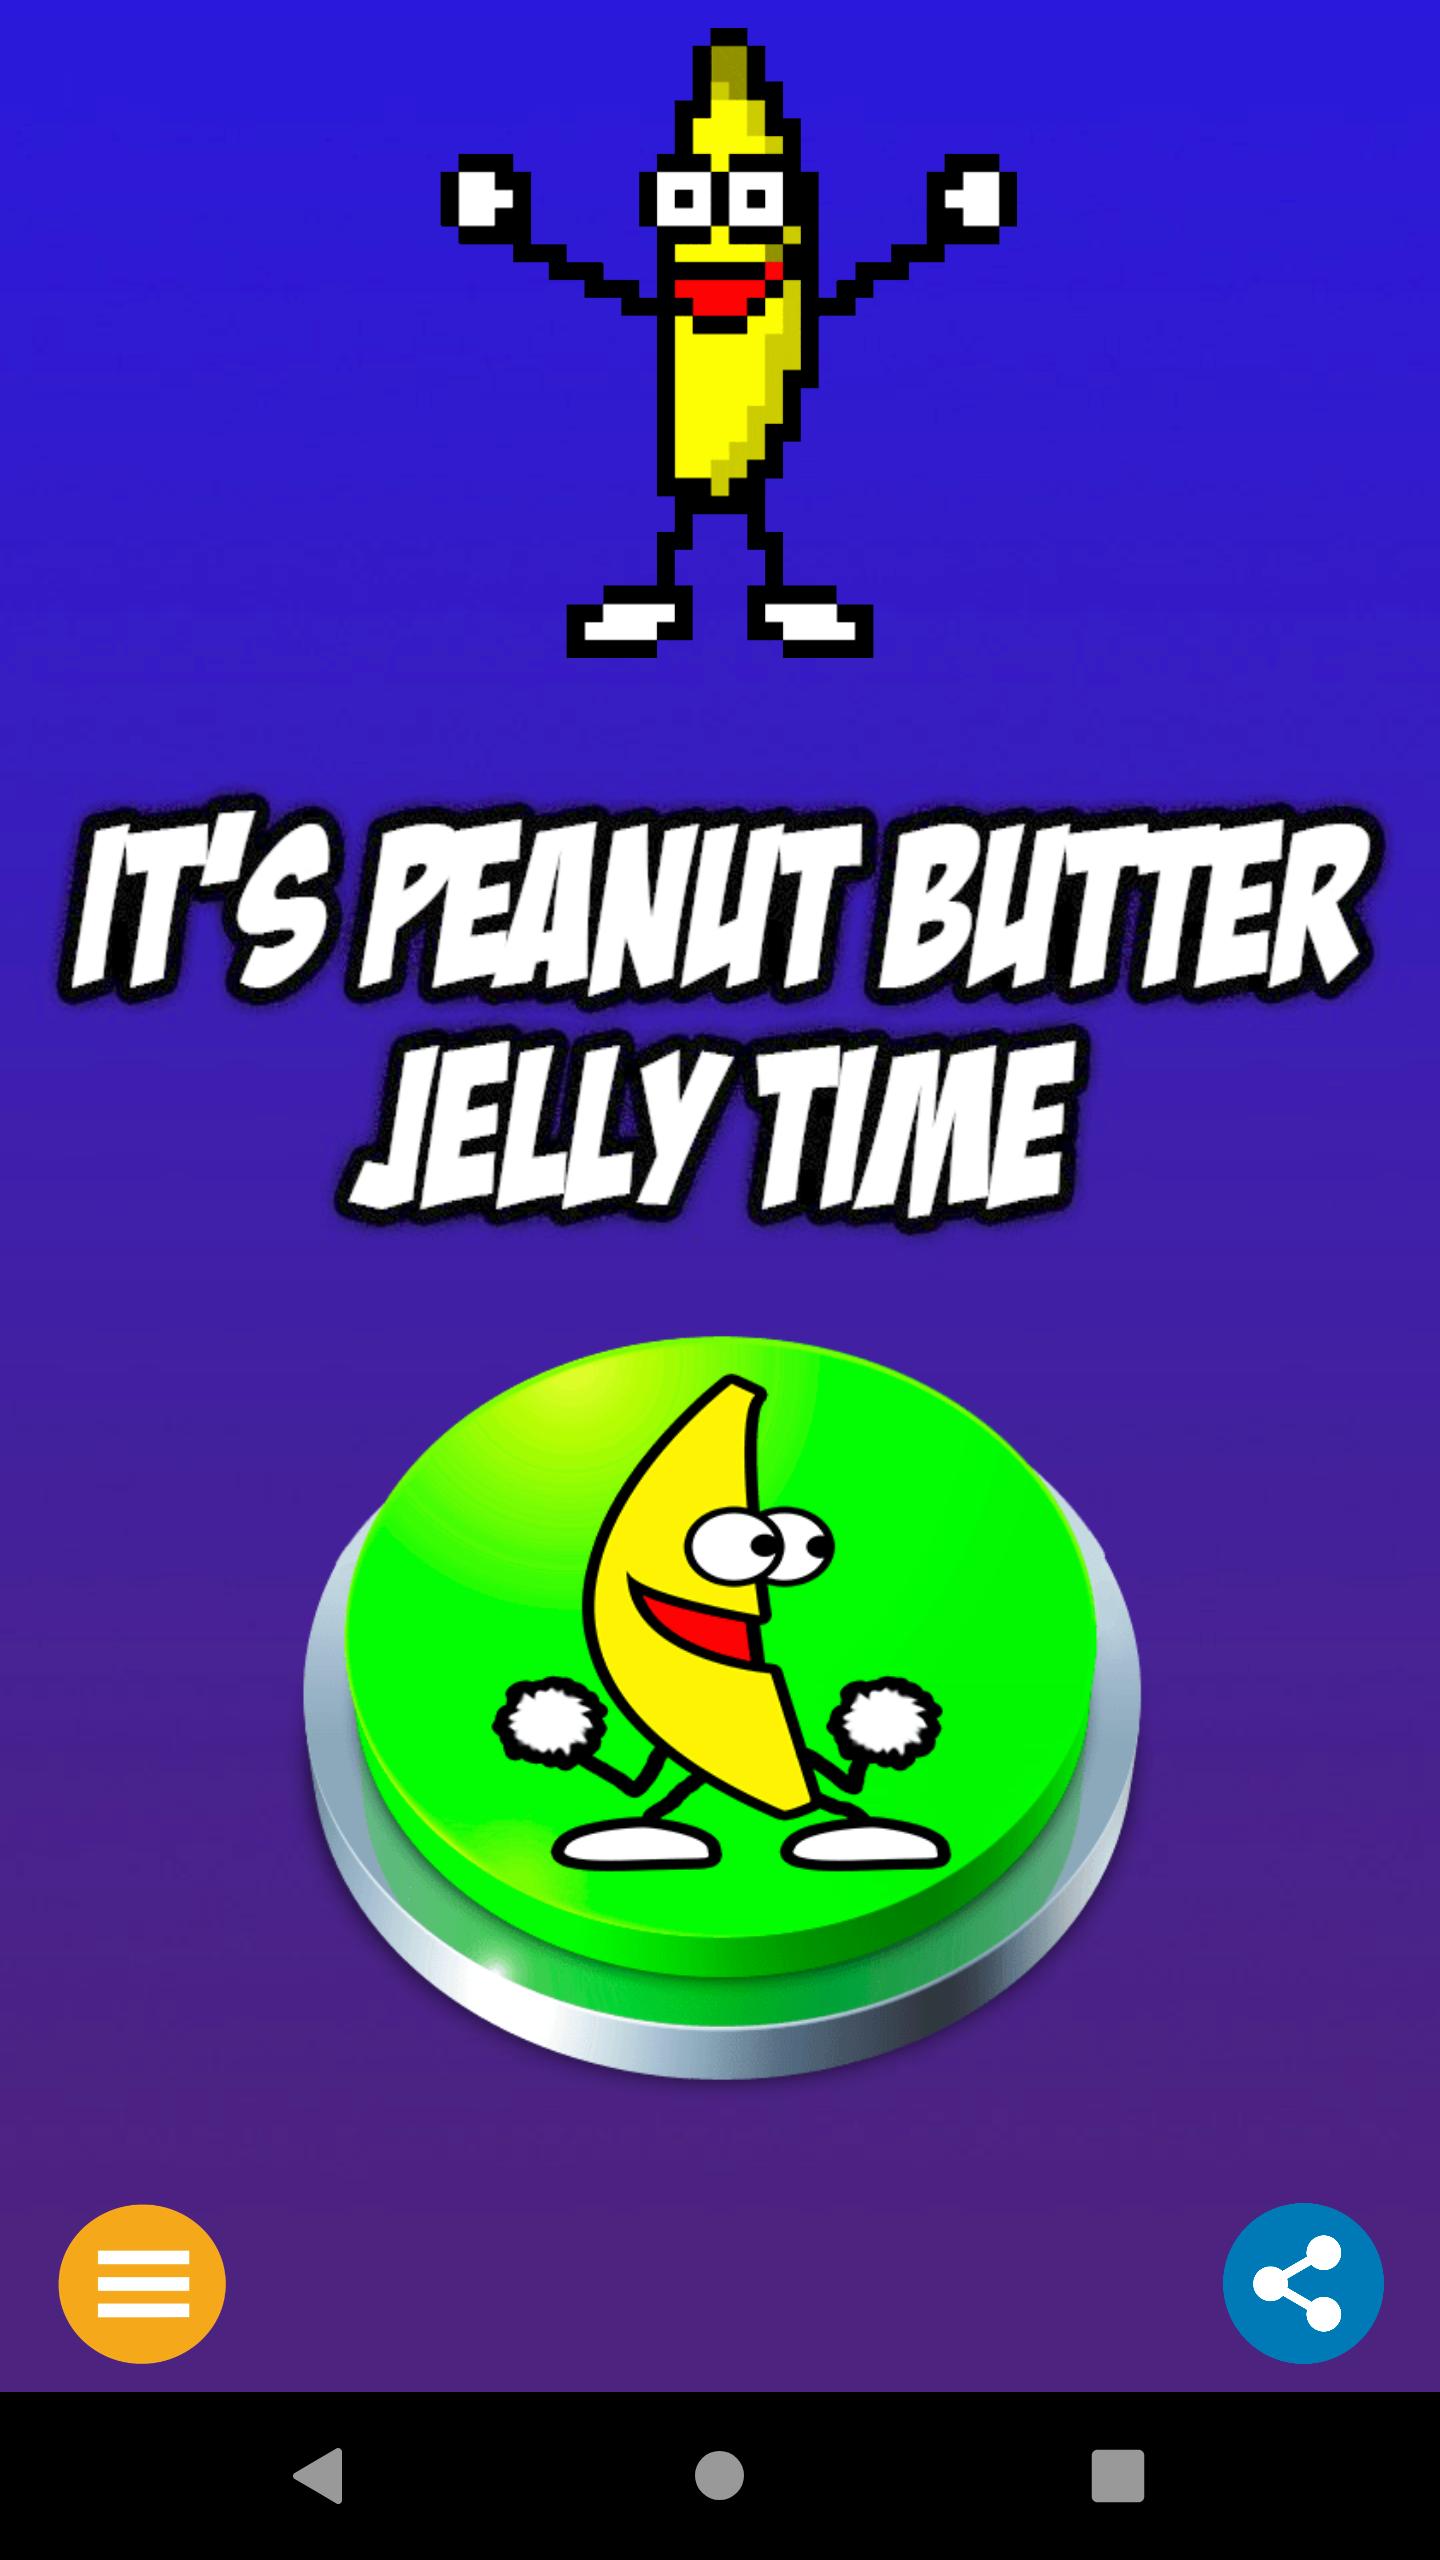 Jelly time. Banana Jelly time. Peanut Jelly time. Peanut Butter Jelly time меме. Peanut Butter Jelly time Roblox.